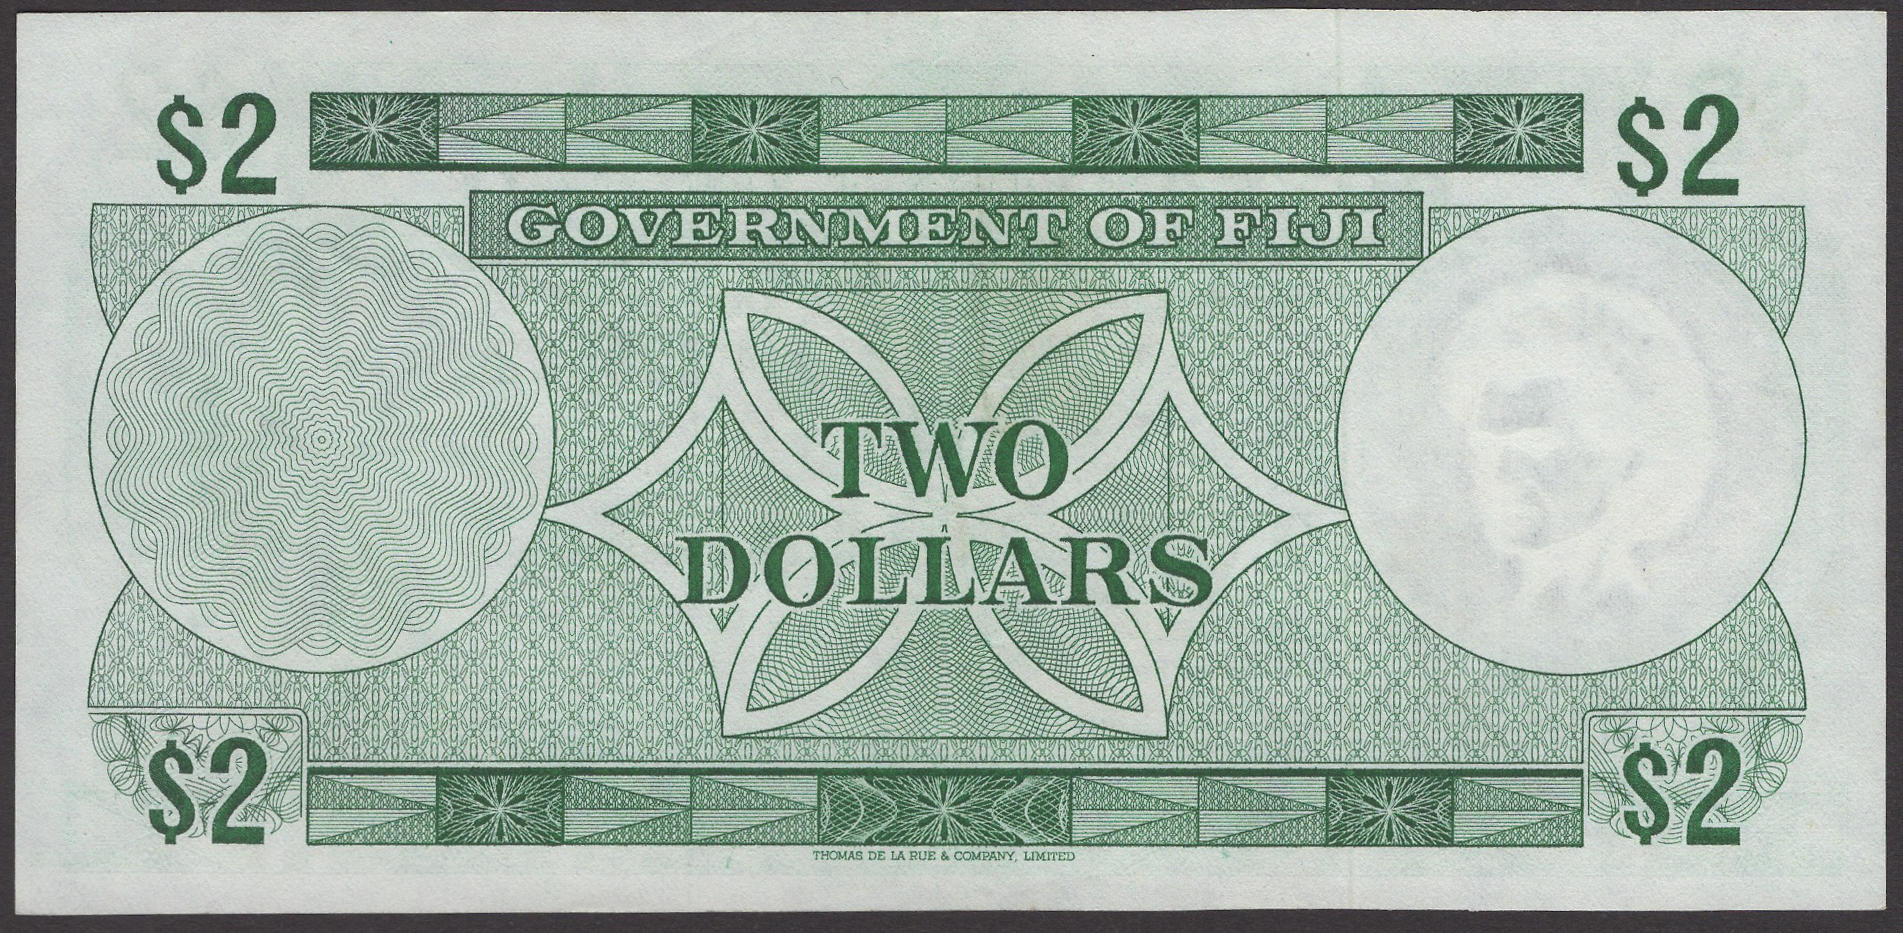 Government of Fiji, 50 Cents, $1, $2 and $5, ND (1971), prefixes A/3, A/3, A/4 and A/1,... - Image 4 of 4